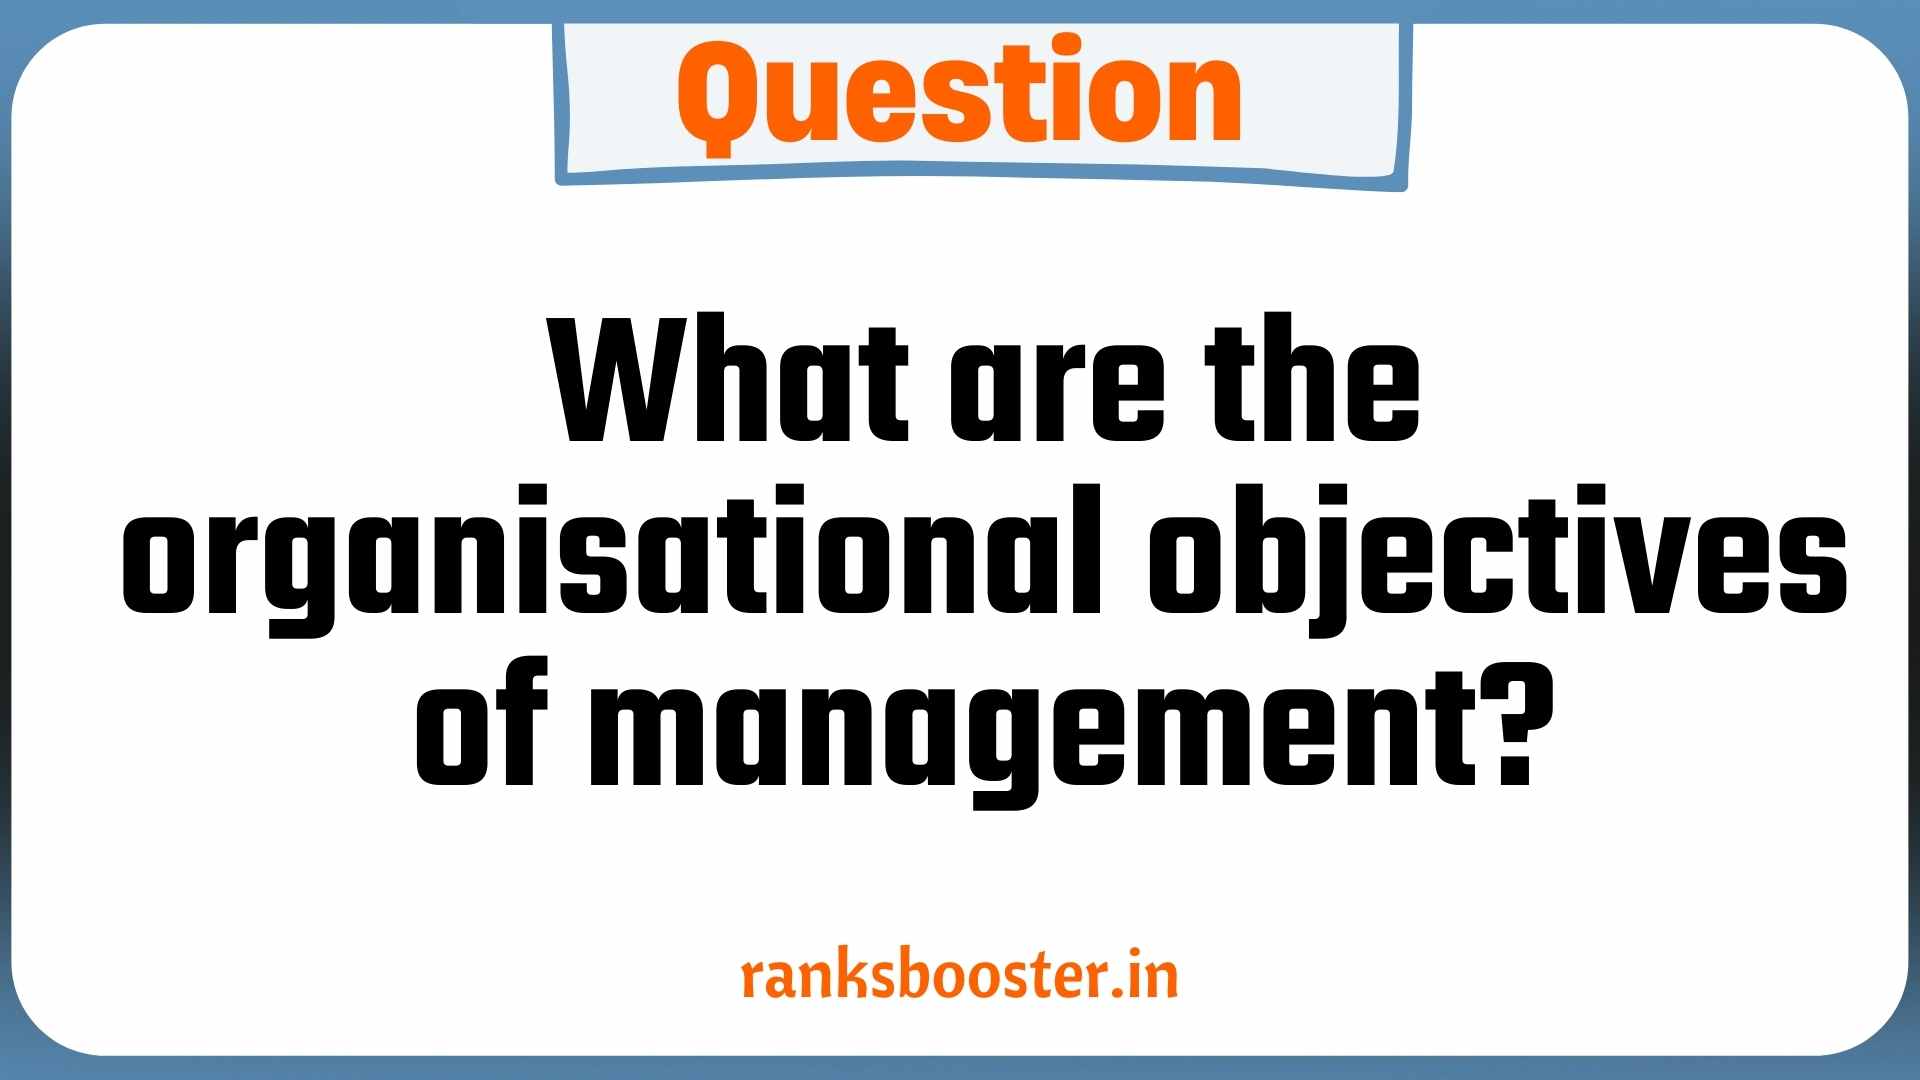 Question: What are the organisational objectives of management?